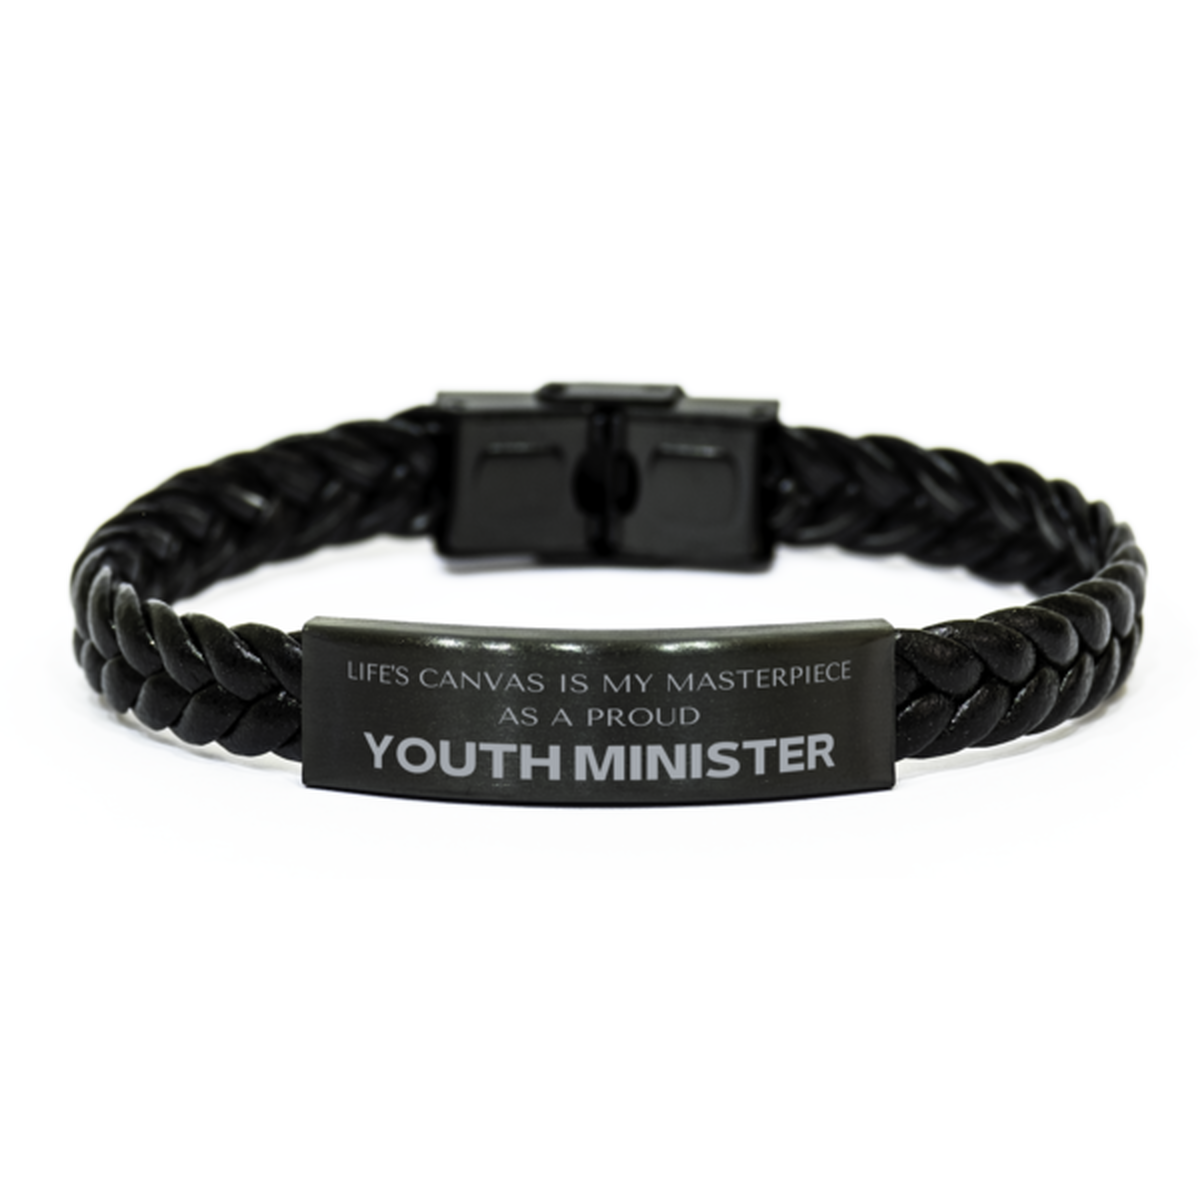 Proud Youth Minister Gifts, Life's canvas is my masterpiece, Epic Birthday Christmas Unique Braided Leather Bracelet For Youth Minister, Coworkers, Men, Women, Friends